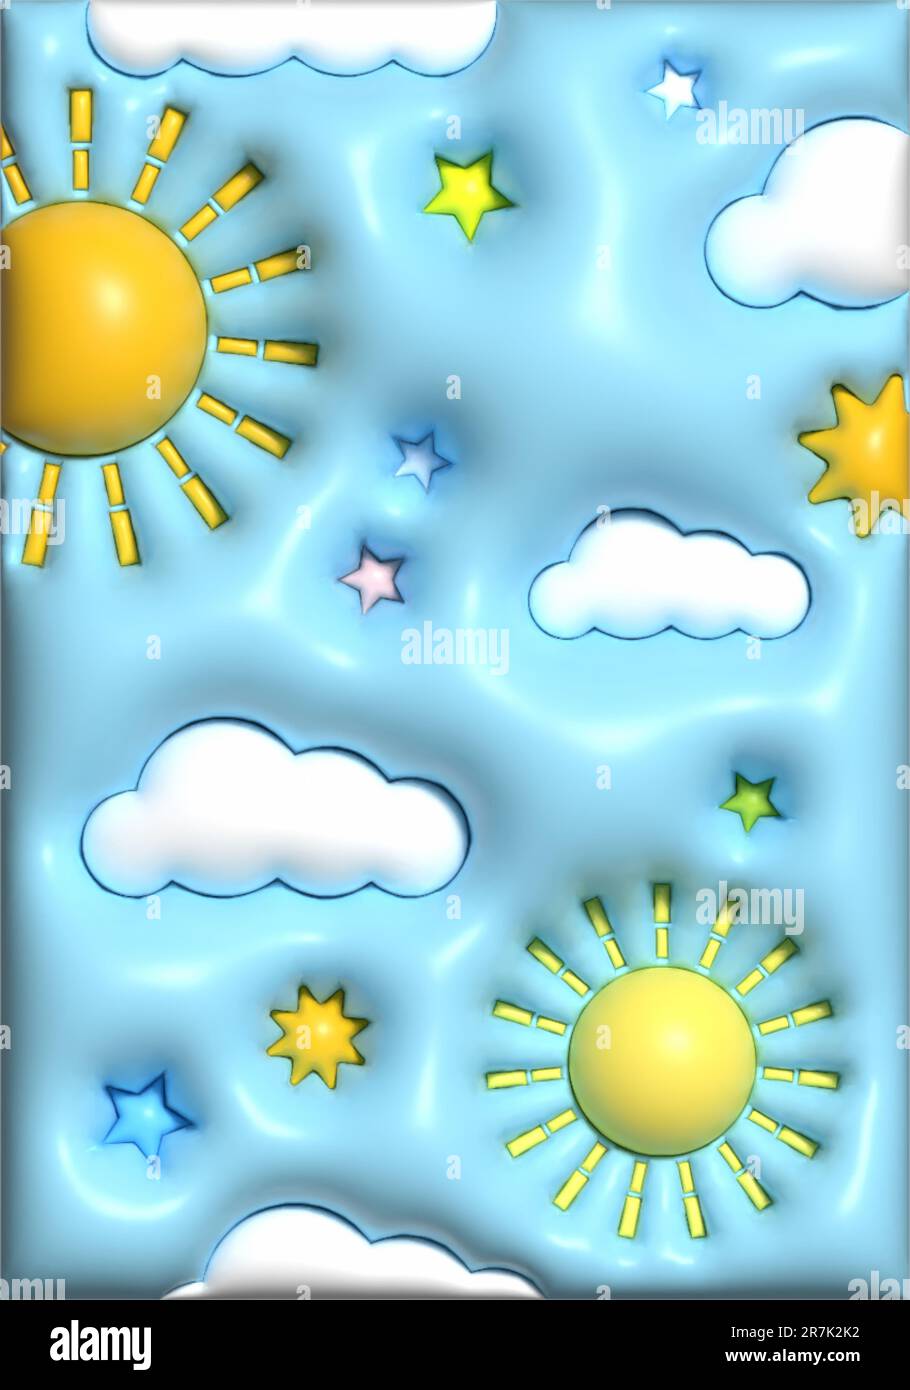 3D render of a cute wallpaper background with summer icons design Stock Photo